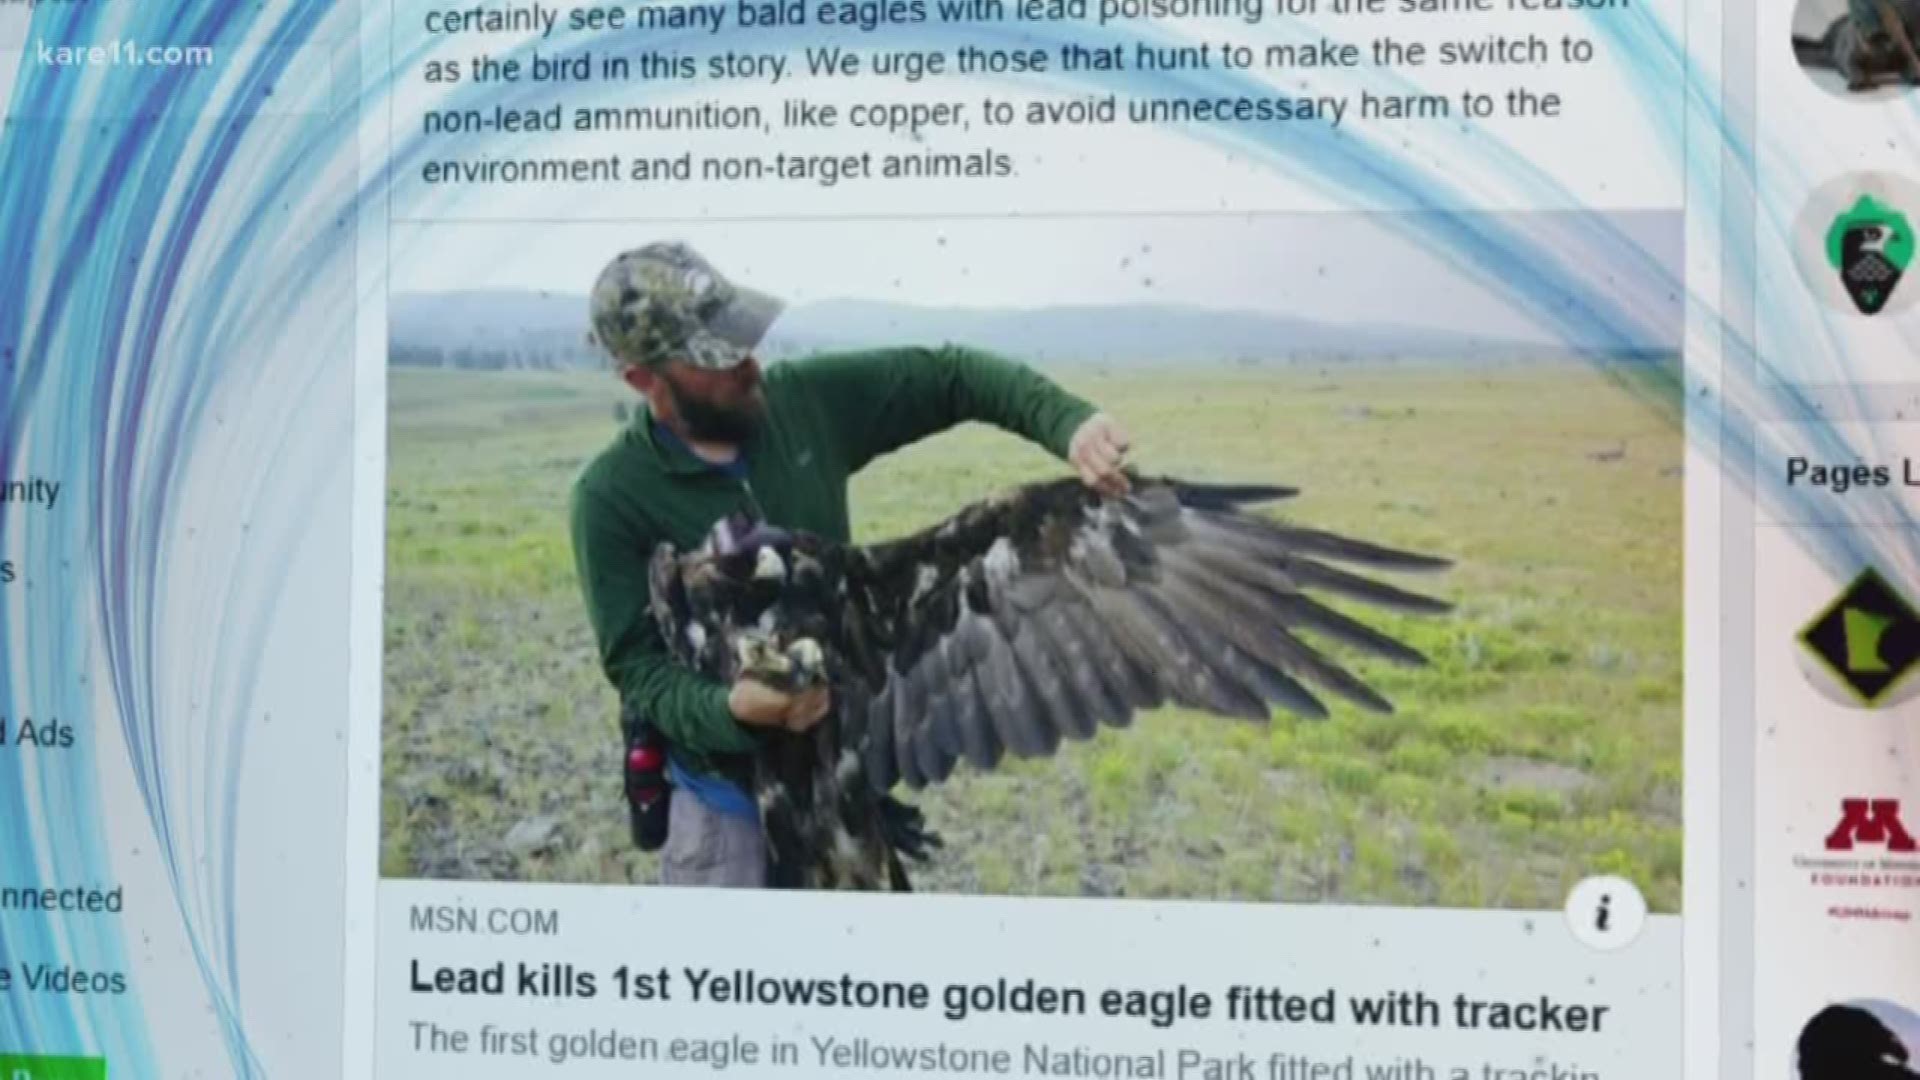 The first golden eagle in Yellowstone National Park fitted with a tracking device has died of lead poisoning, likely after consuming bullet fragments while scavenging the remains of an animal killed by a hunter, officials said Monday. https://kare11.tv/2UmztNI